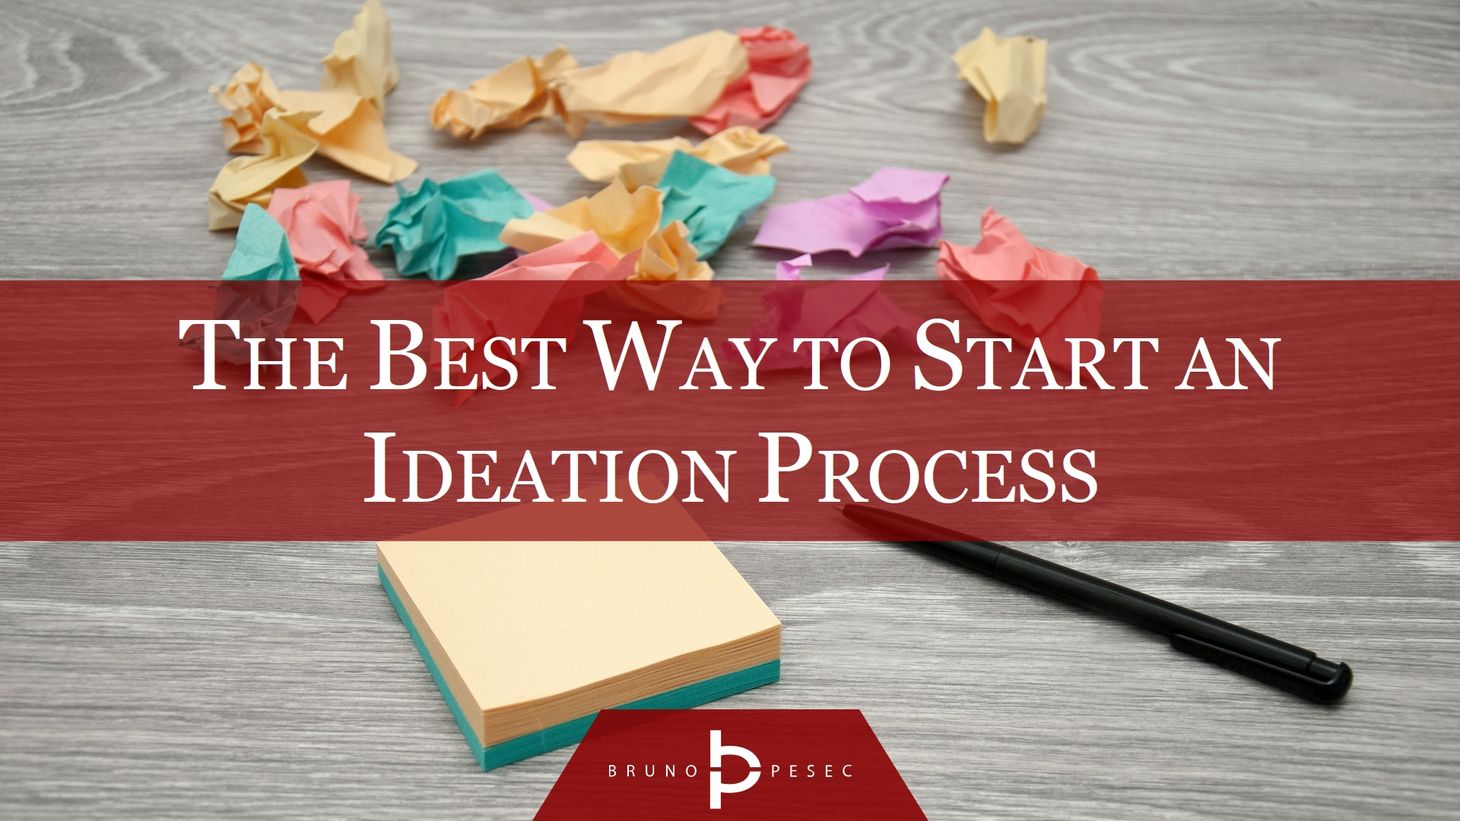 The best way to start an ideation process